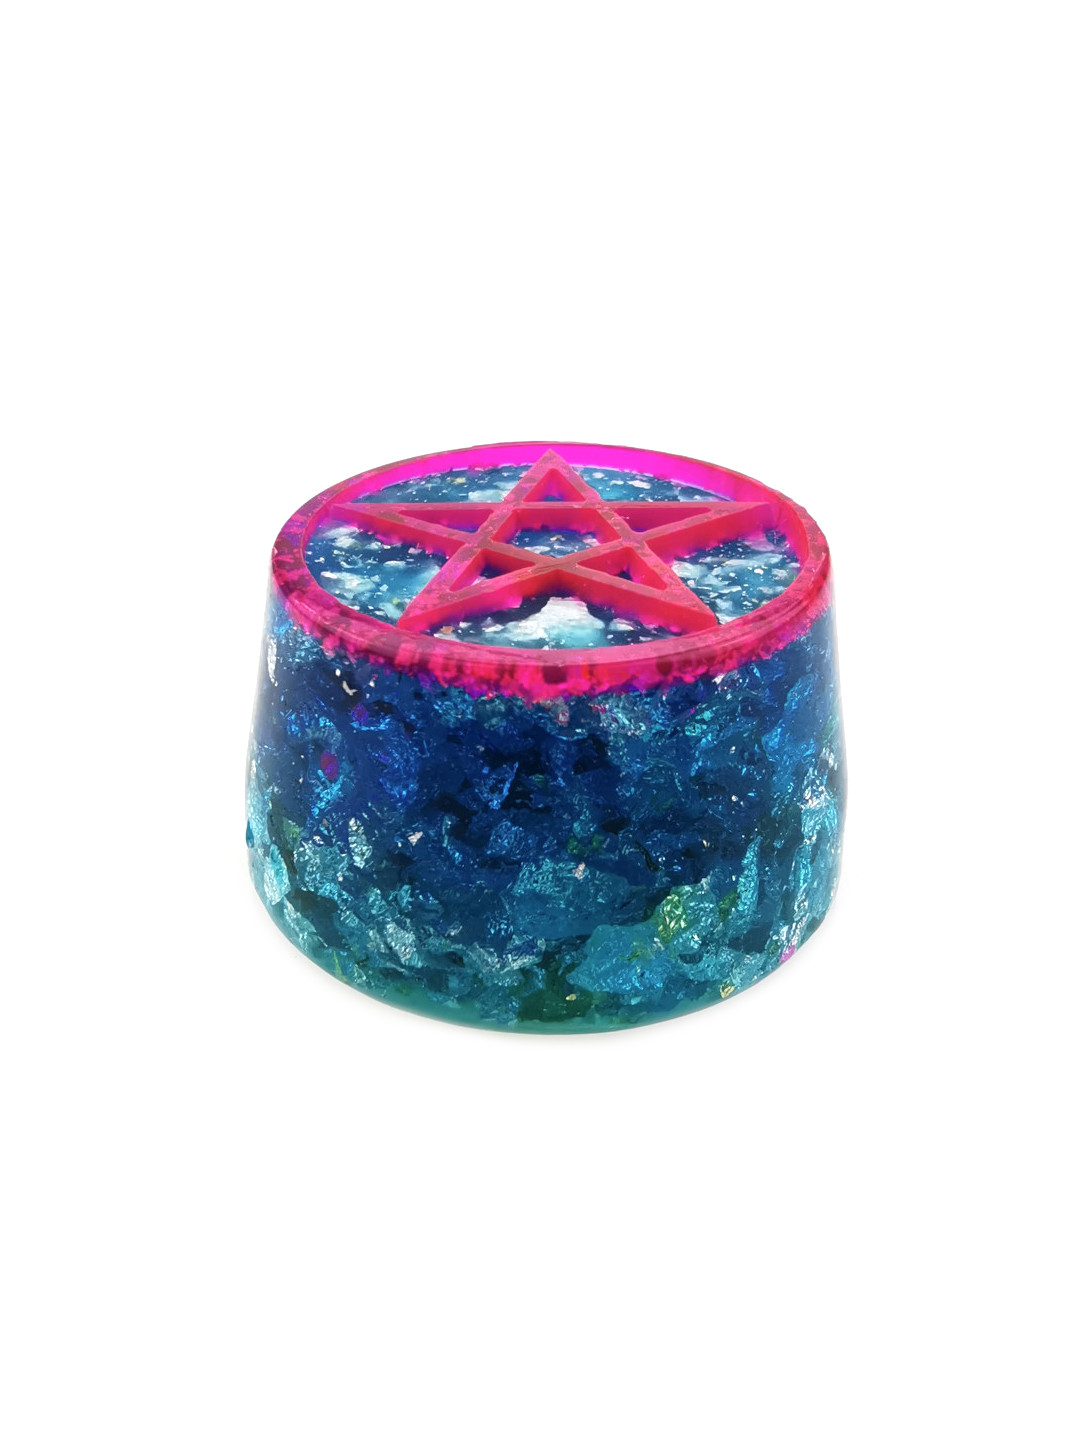 Pentagram Orgone Energy Puck in Pink and Blue by OrgoneVibes